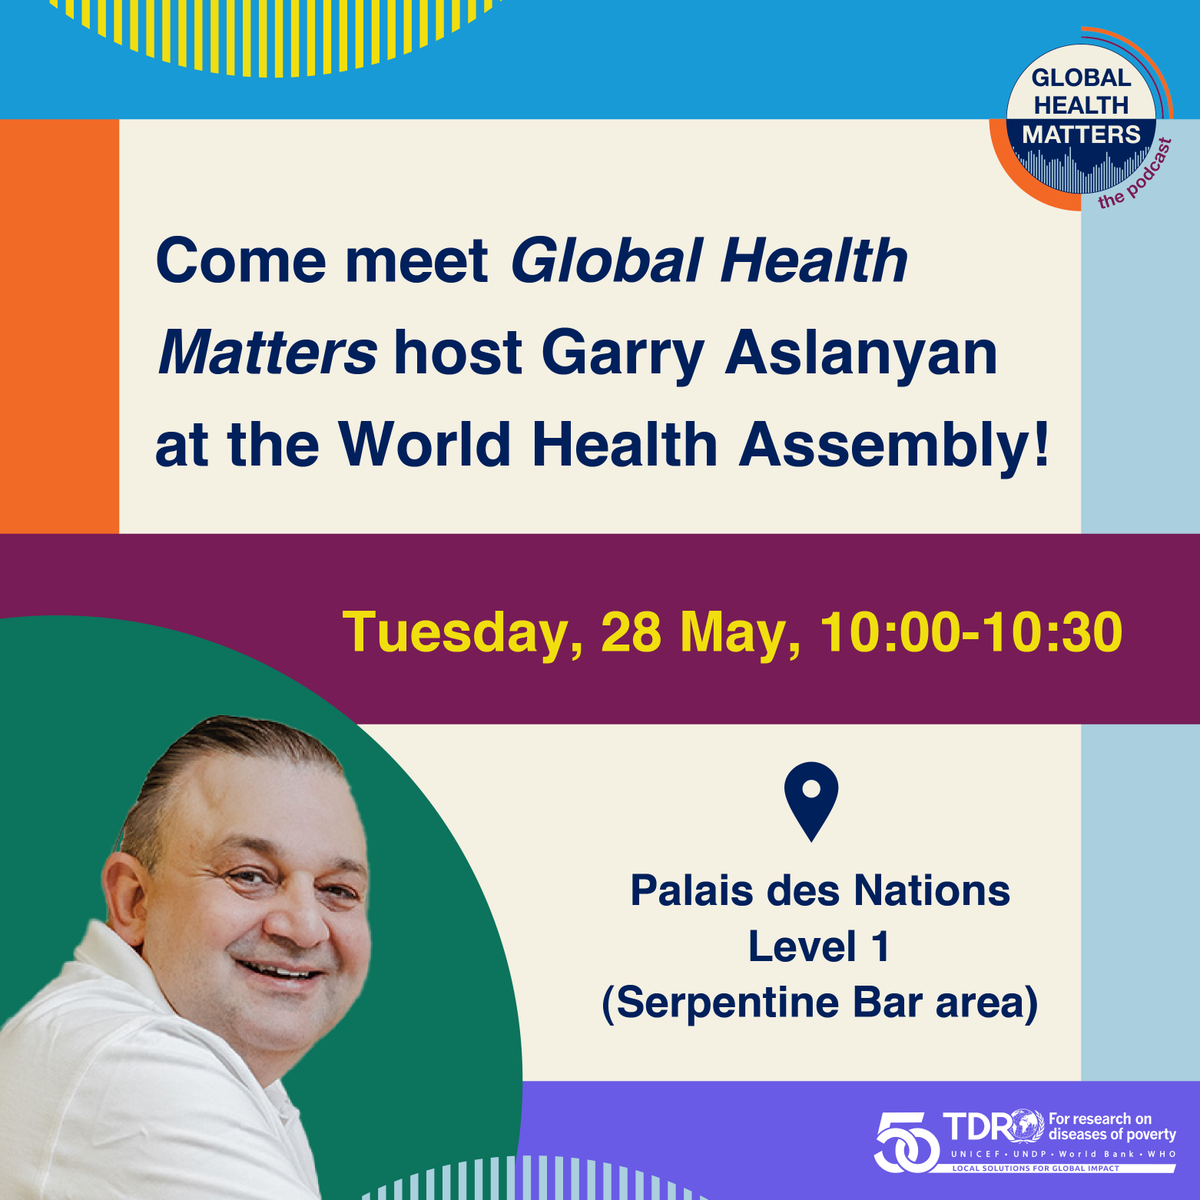 Will you be at #WHA77 Tuesday? Come meet @GarryAslanyan to learn about the new TDR Strategy 2024-2029, chat about the #GlobalHealthMatters podcast and claim some podcast merchandise! #TDR50